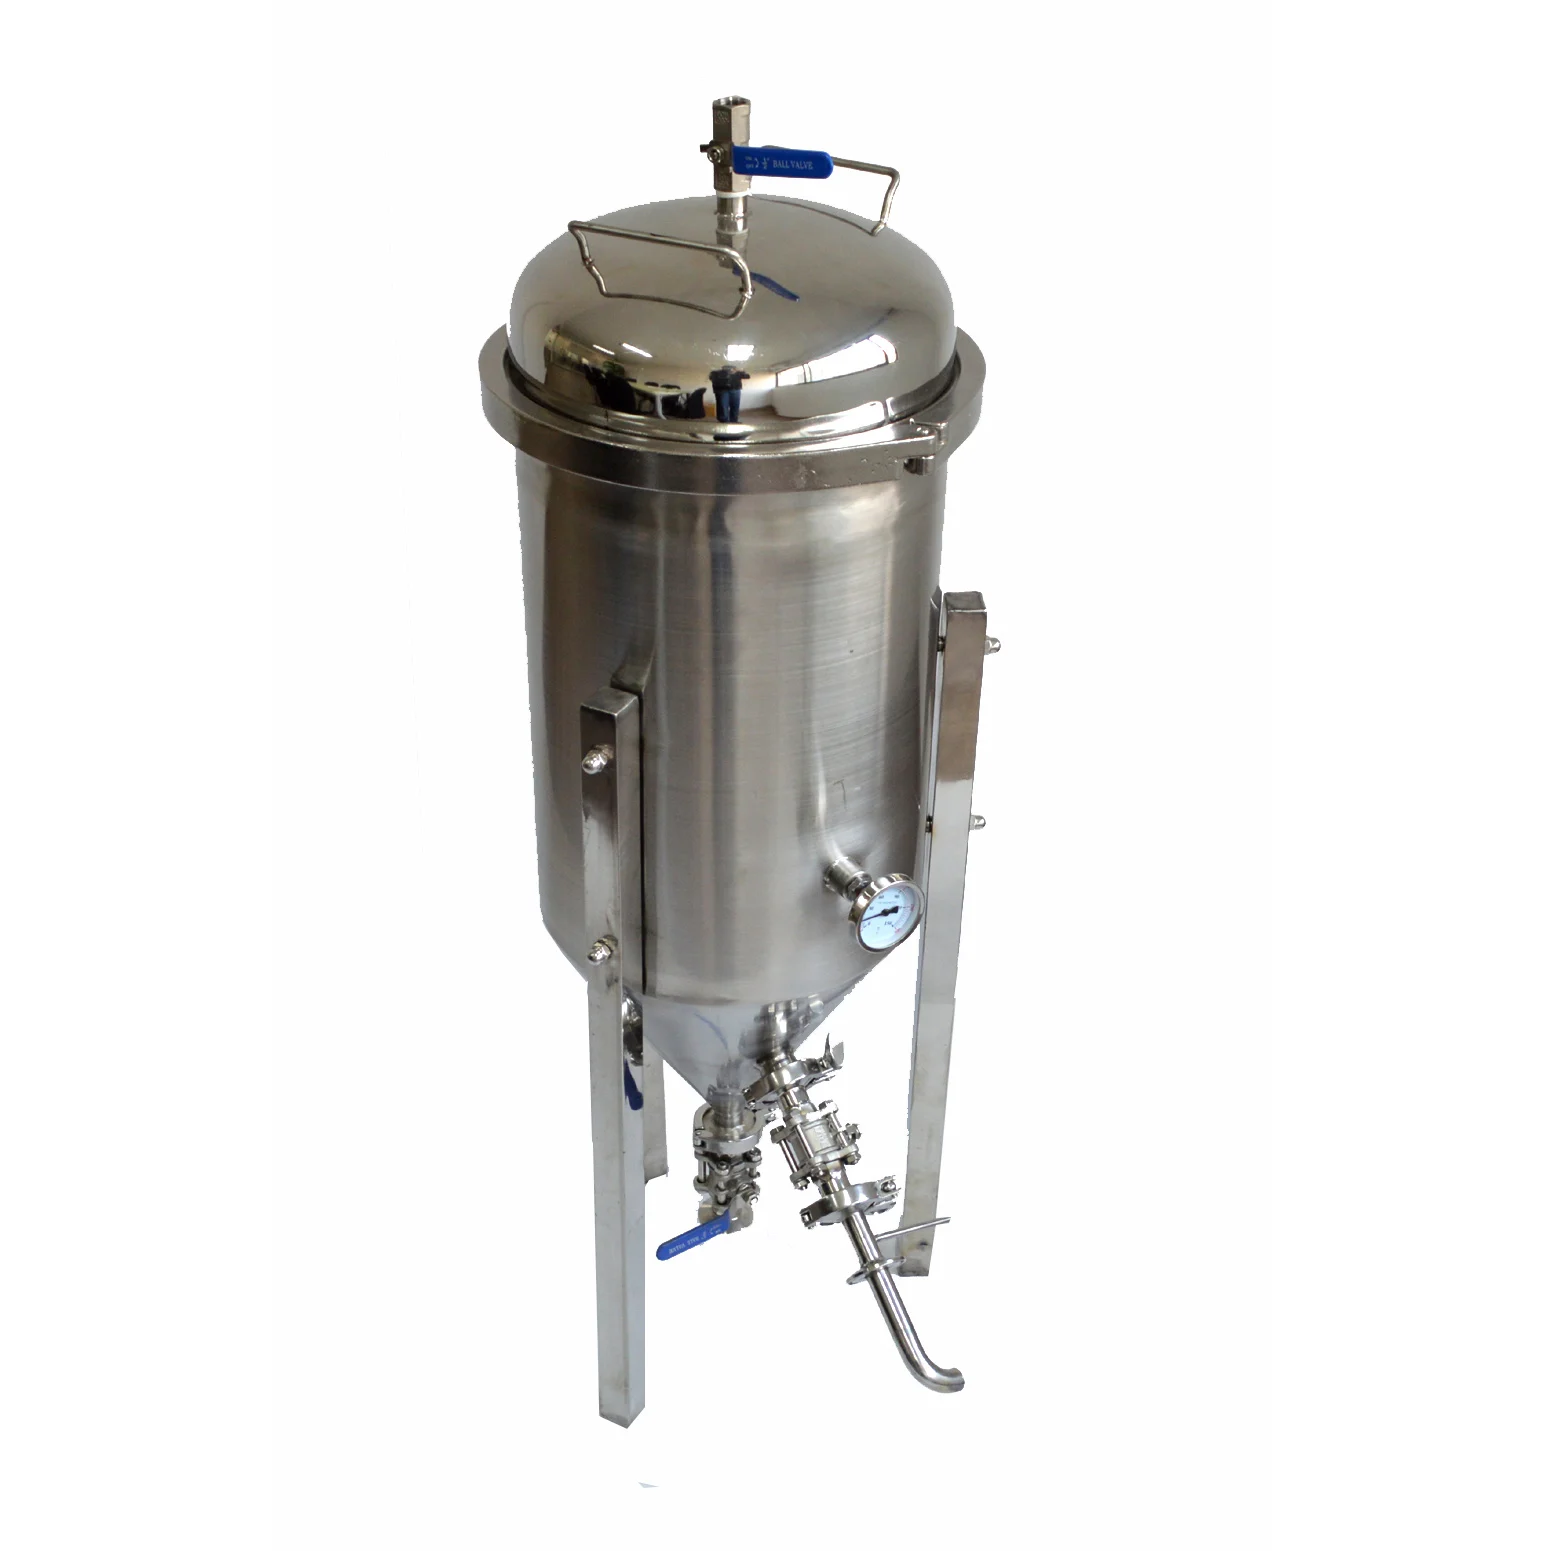 25L/5Gallon Stainless Conical Beer Fermenter with all accessories,Wooden Case Protected, Micro Brew, Homebrew